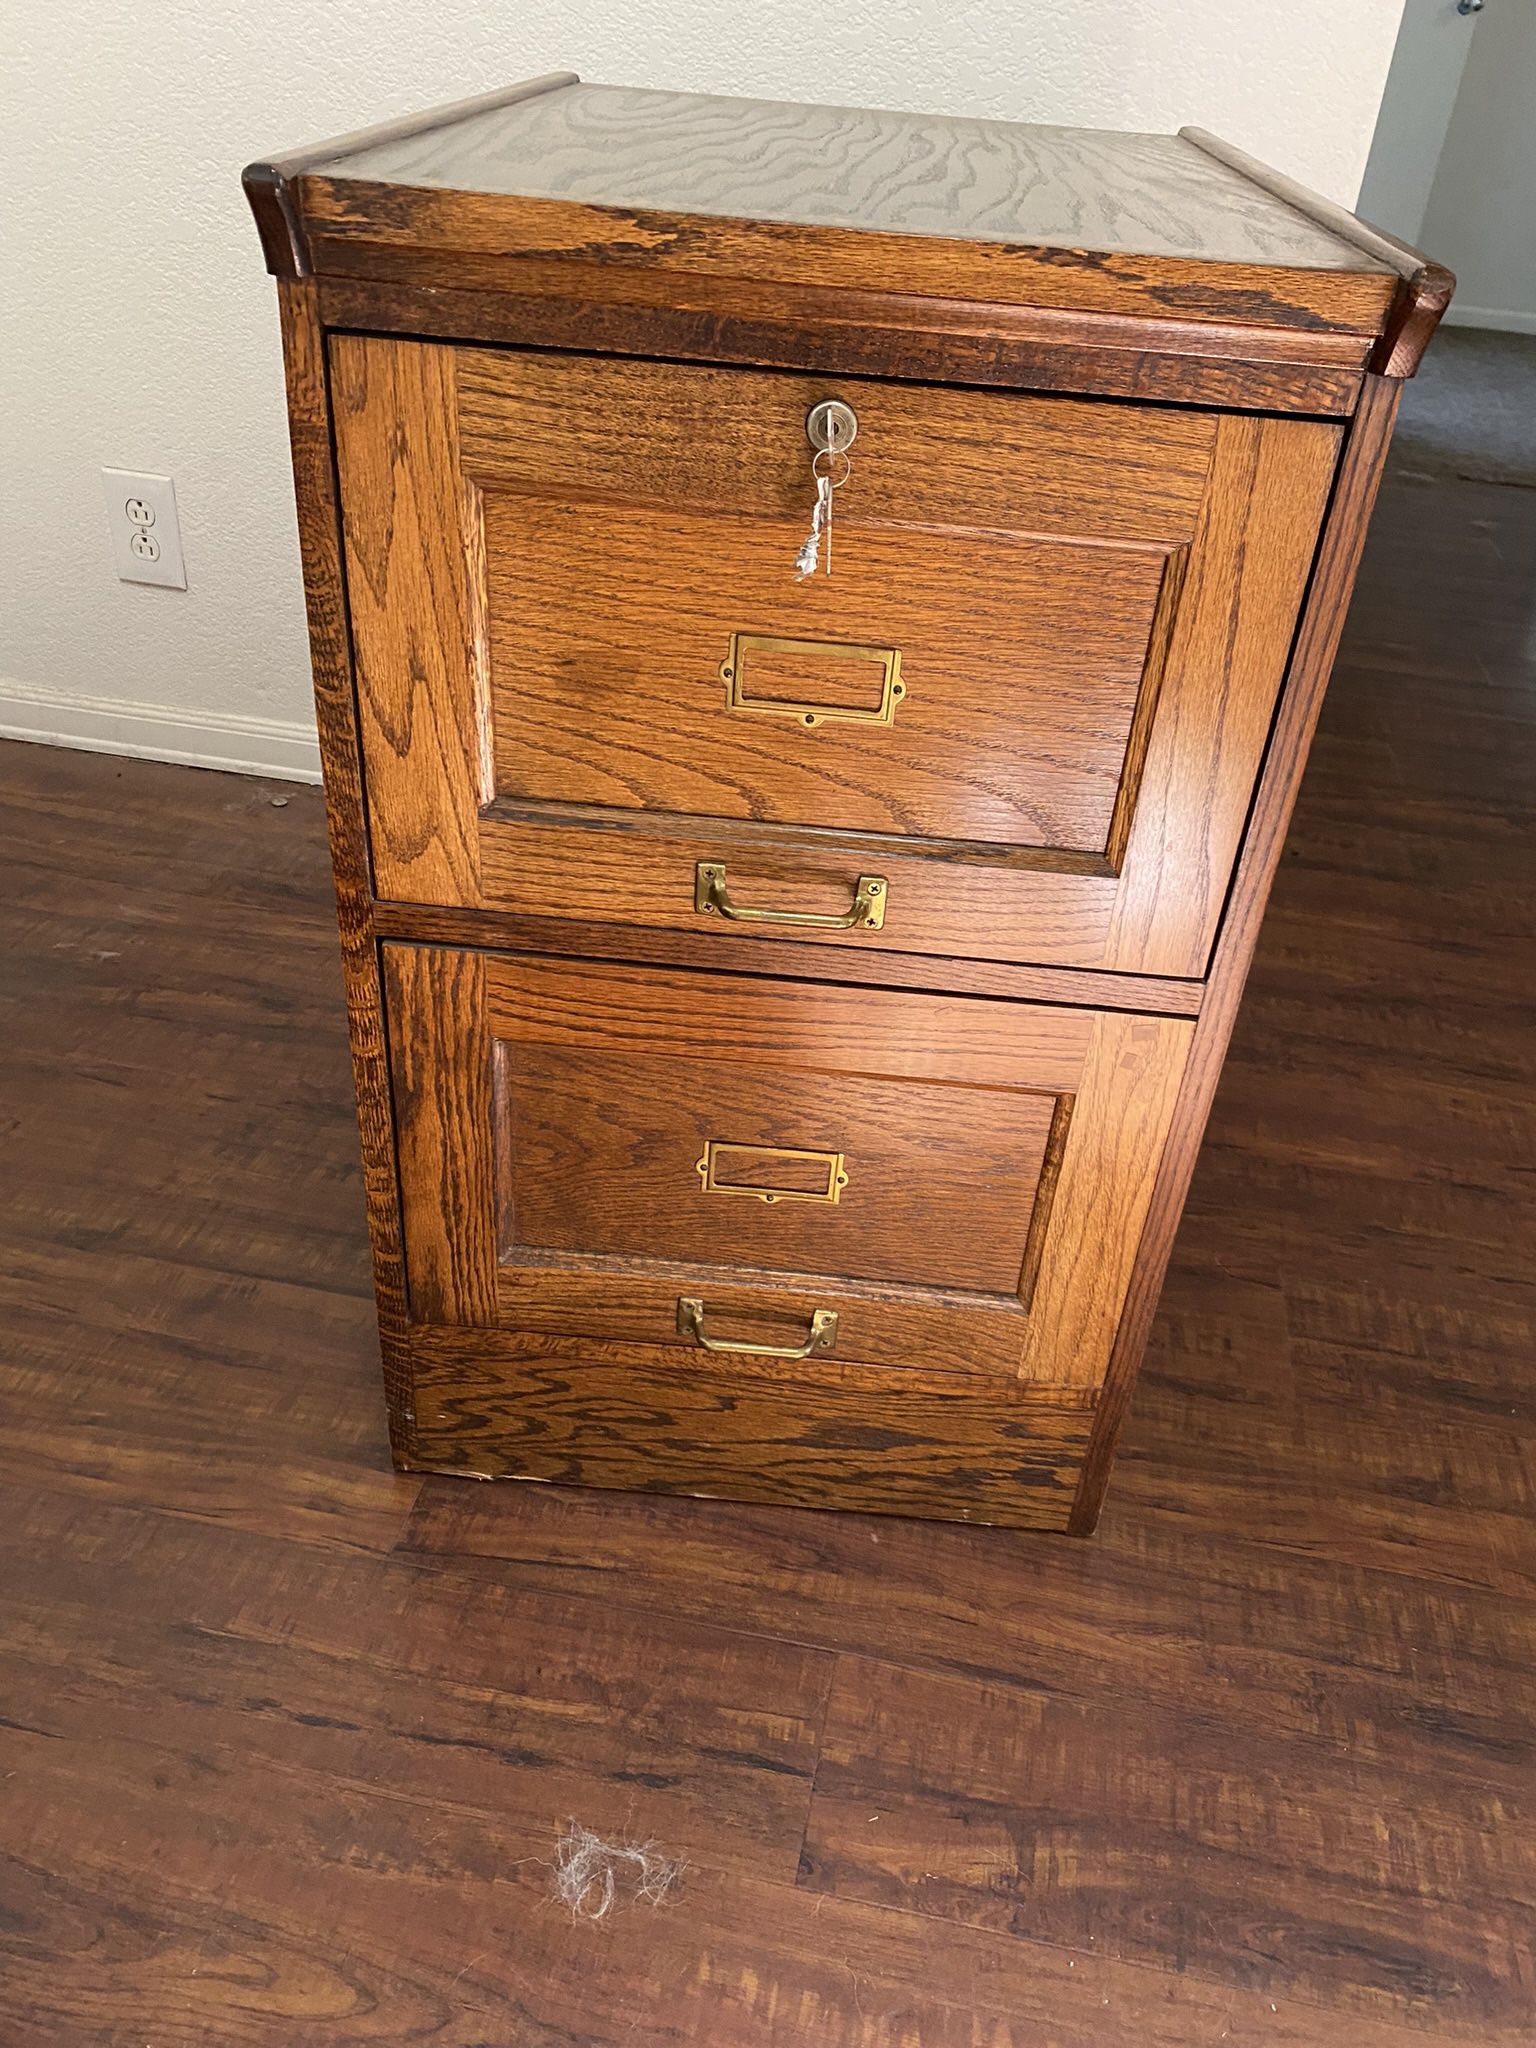 Antique Filing Cabinet Like-New Condition